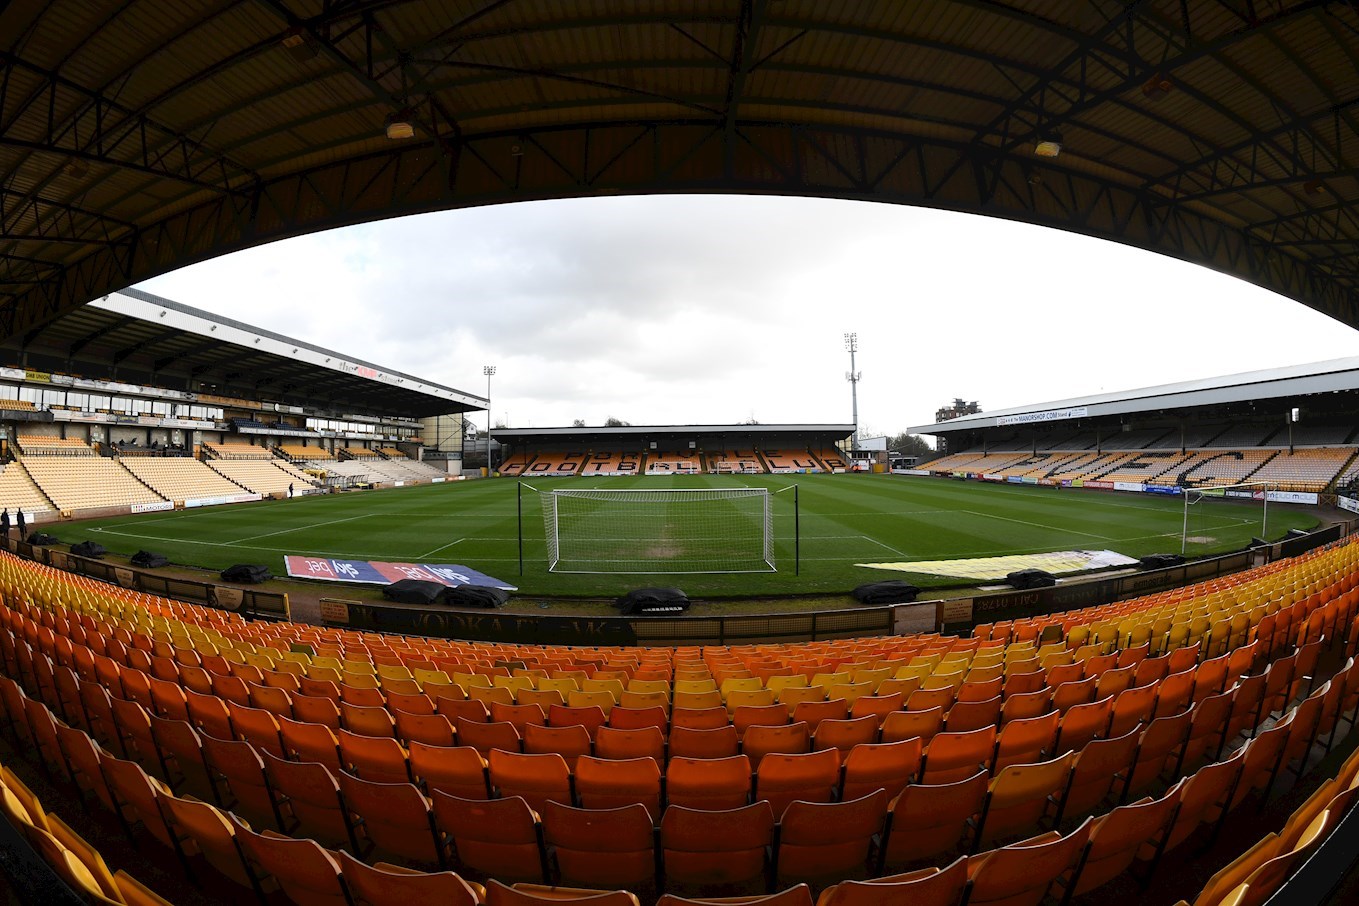 Pay On The Day Available At Port Vale - News - Oldham Athletic